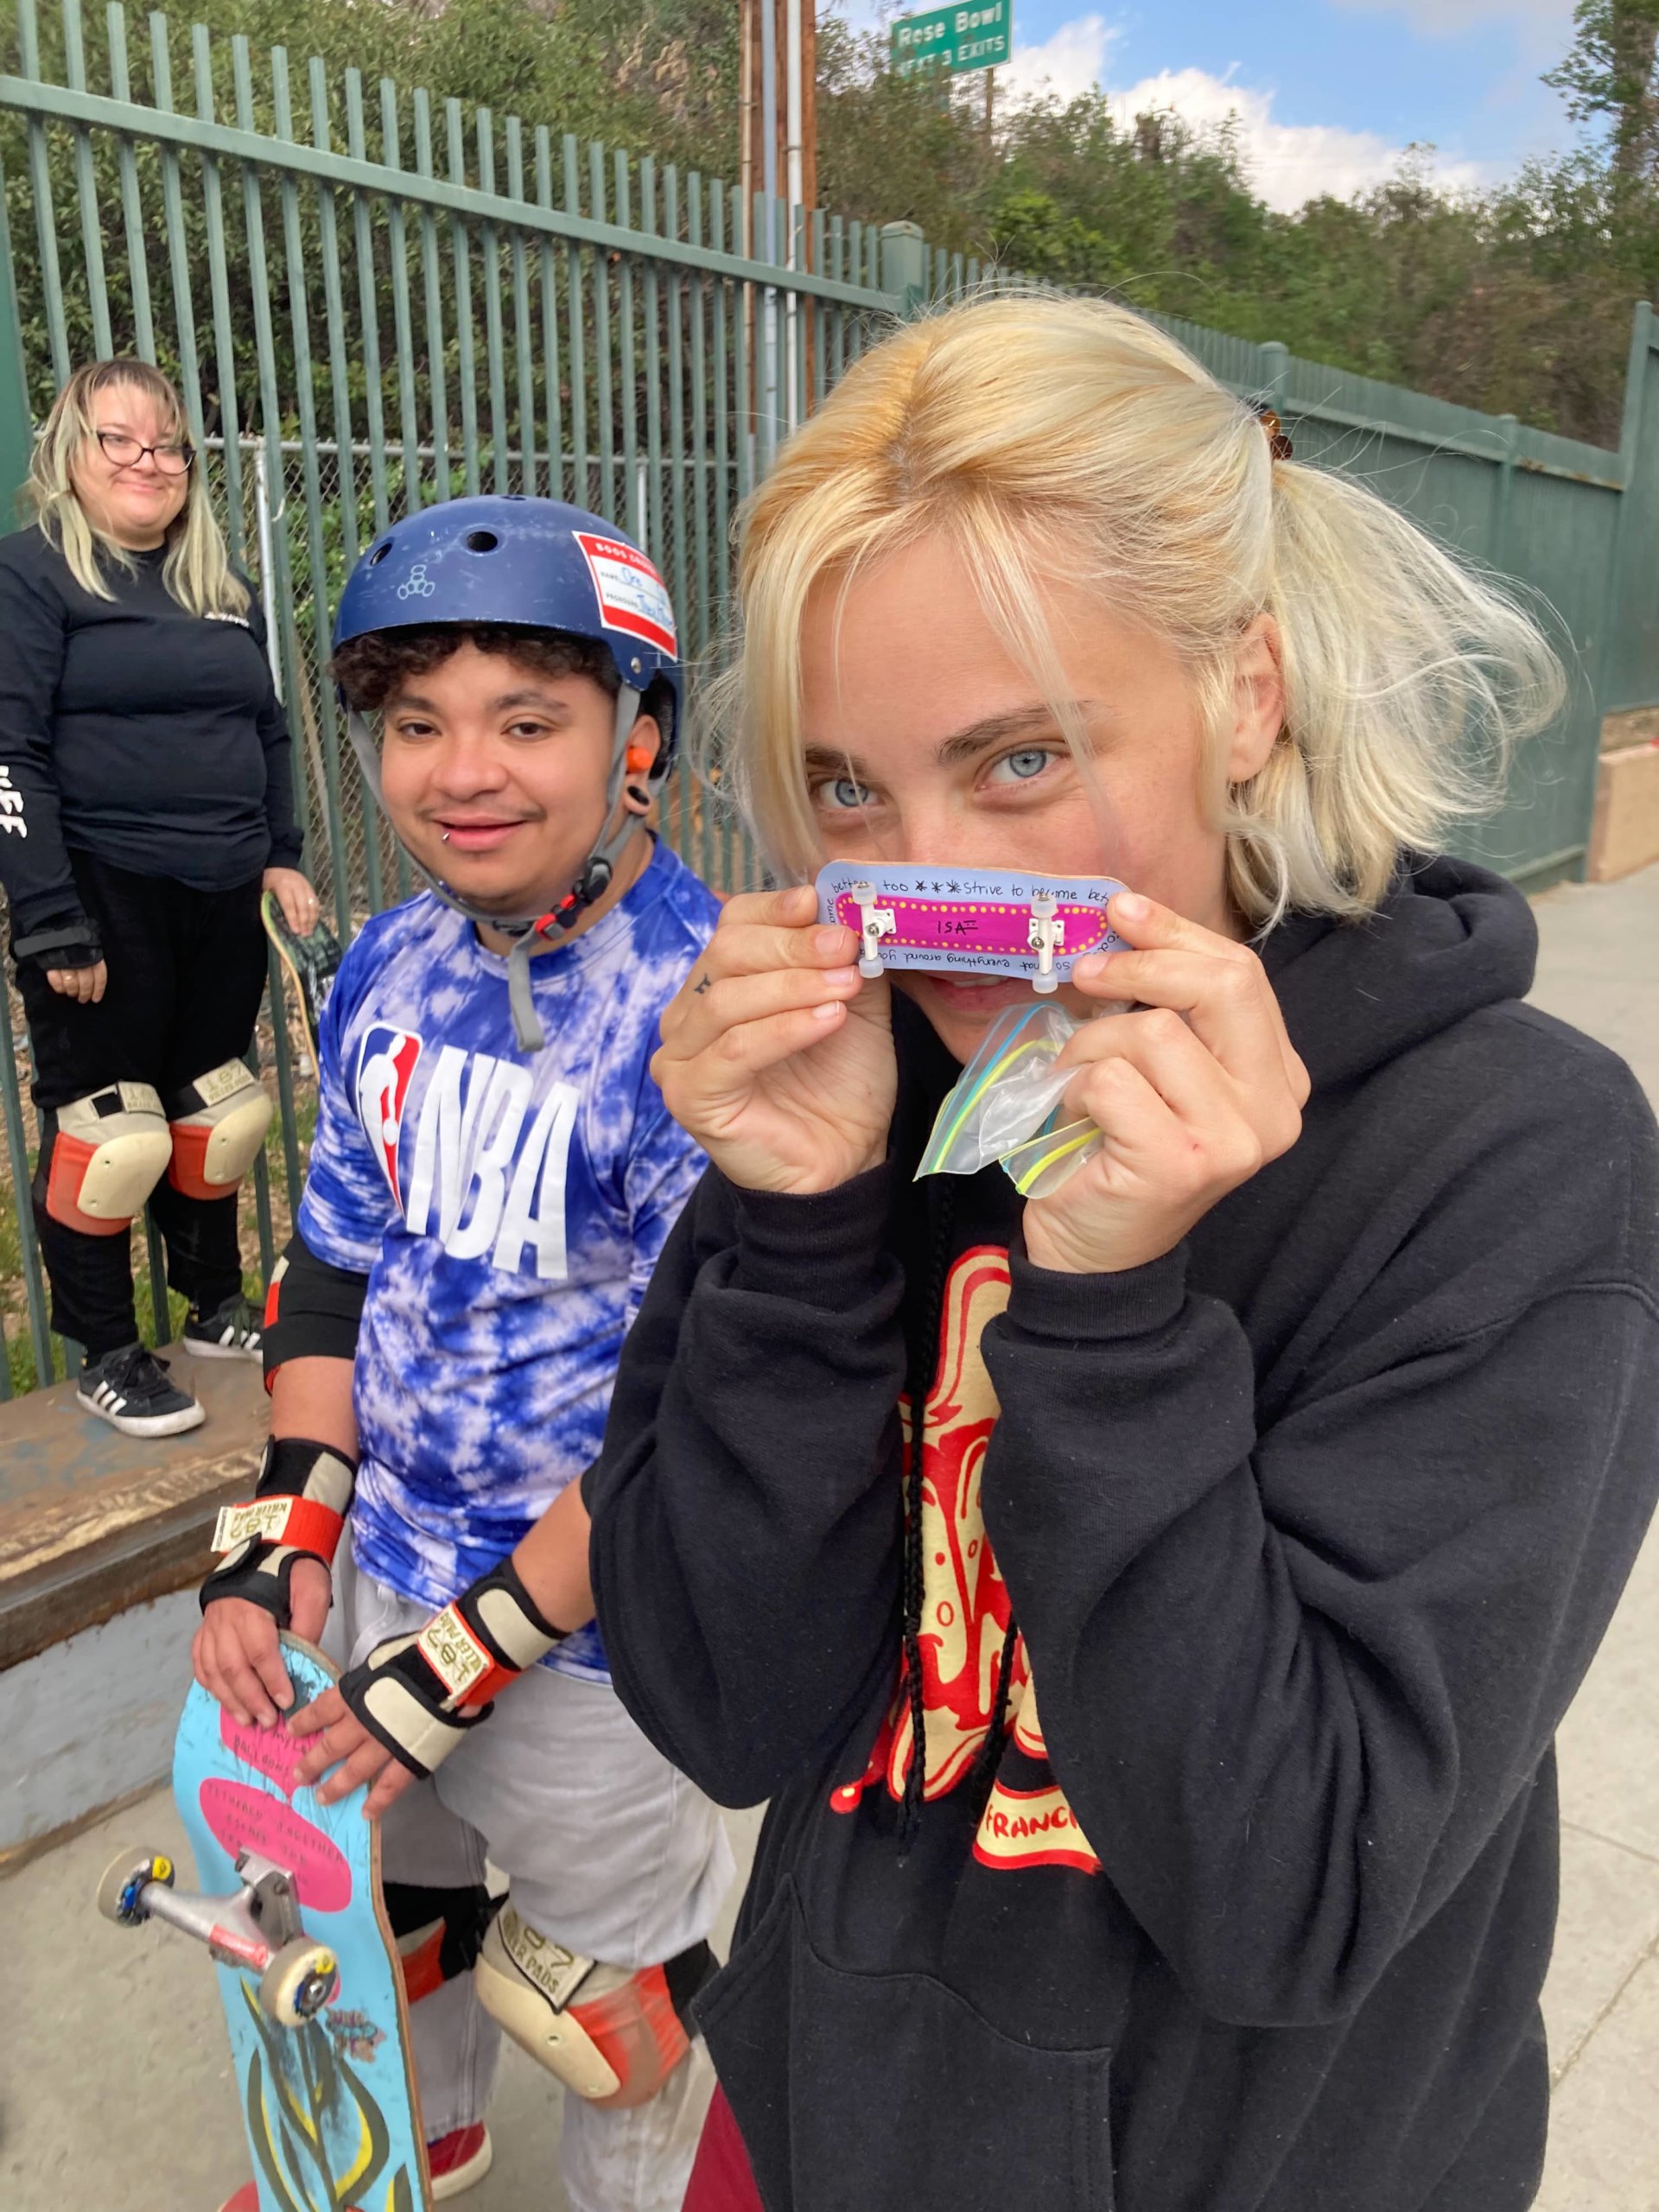 sierra from wake and skate with fingerboard